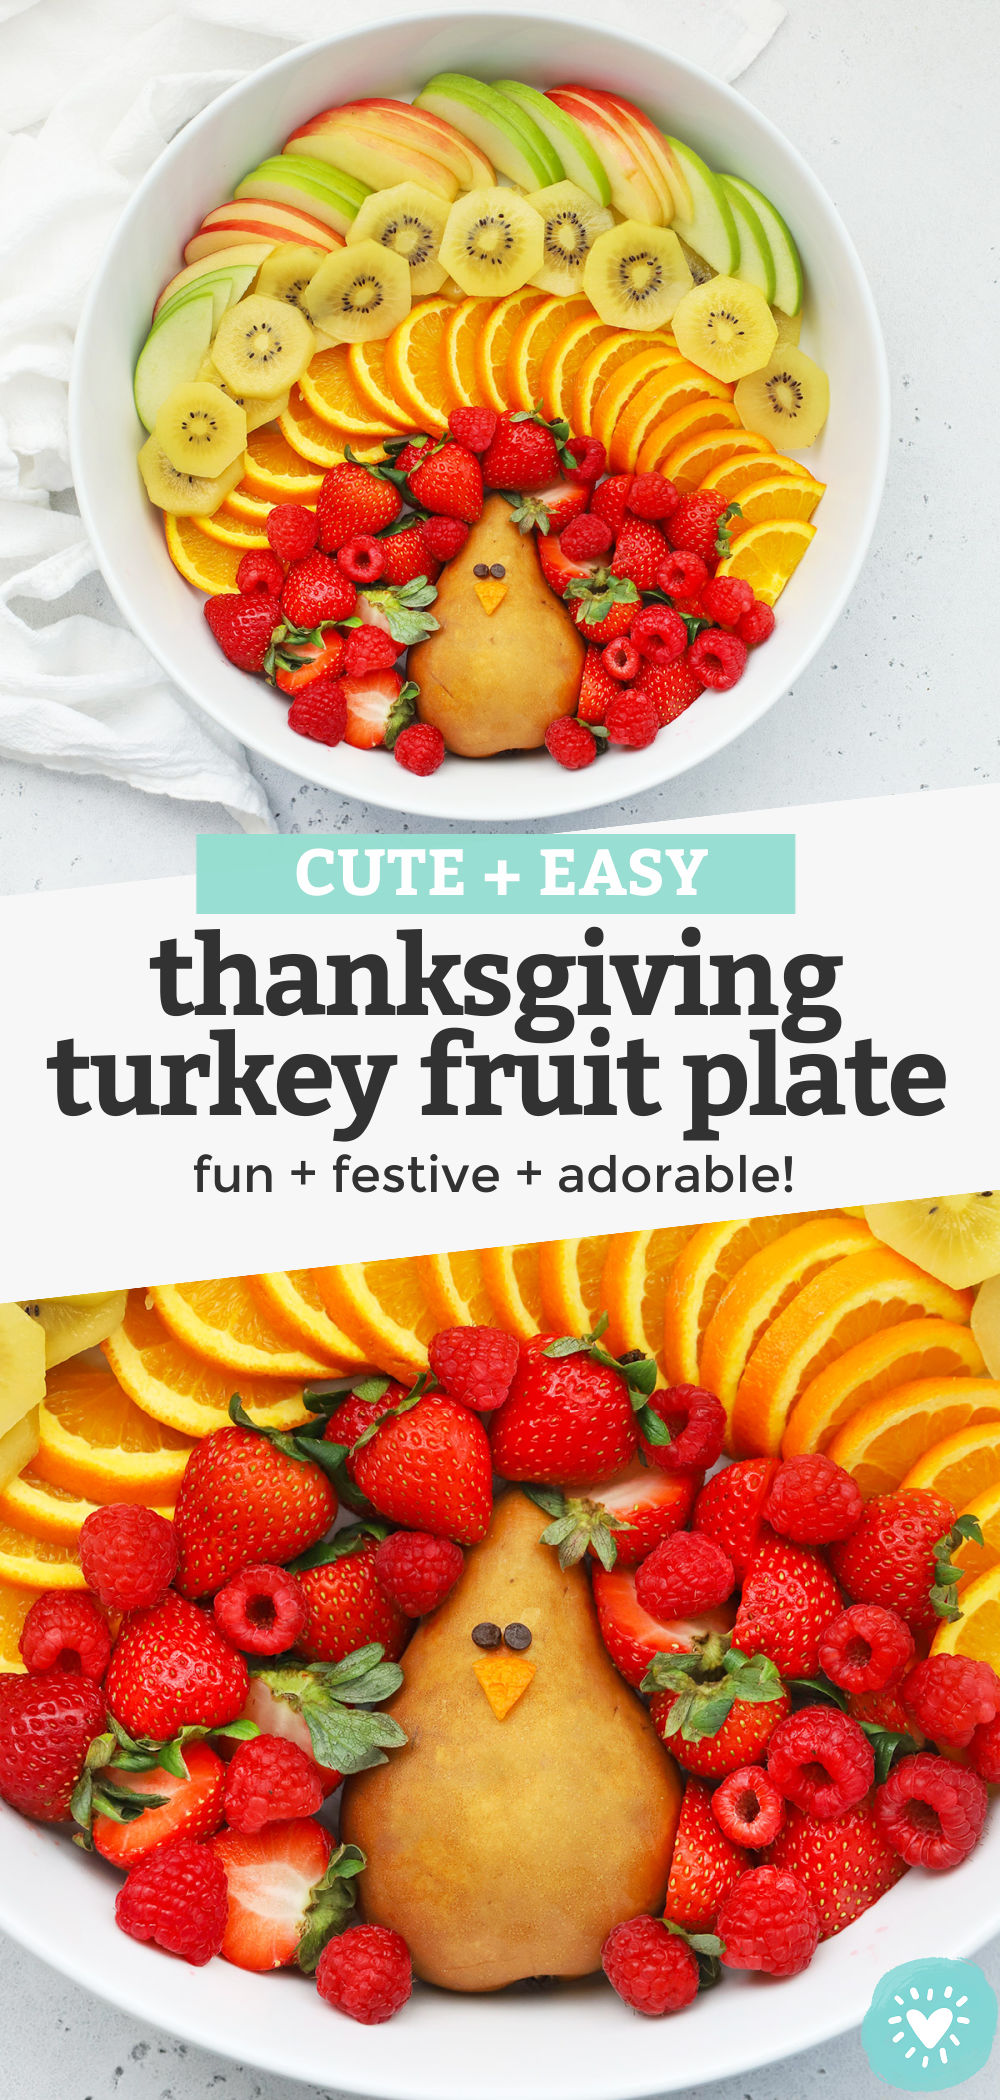 Thanksgiving Turkey Fruit Plate - This turkey-shaped Thanksgiving fruit platter looks adorable at holiday get-togethers and parties. It's a favorite with kids and grown-ups alike! (Naturally gluten-free, vegan & paleo) // Thanksgiving Appetizer // Thanksgiving Snack // Thanksgiving Fruit Platter // Turkey Fruit Platter // Fall Appetizer // #paleo #vegan #thanksgiving #appetizer #turkey #fruitplate #fruitplatter #healthysnack